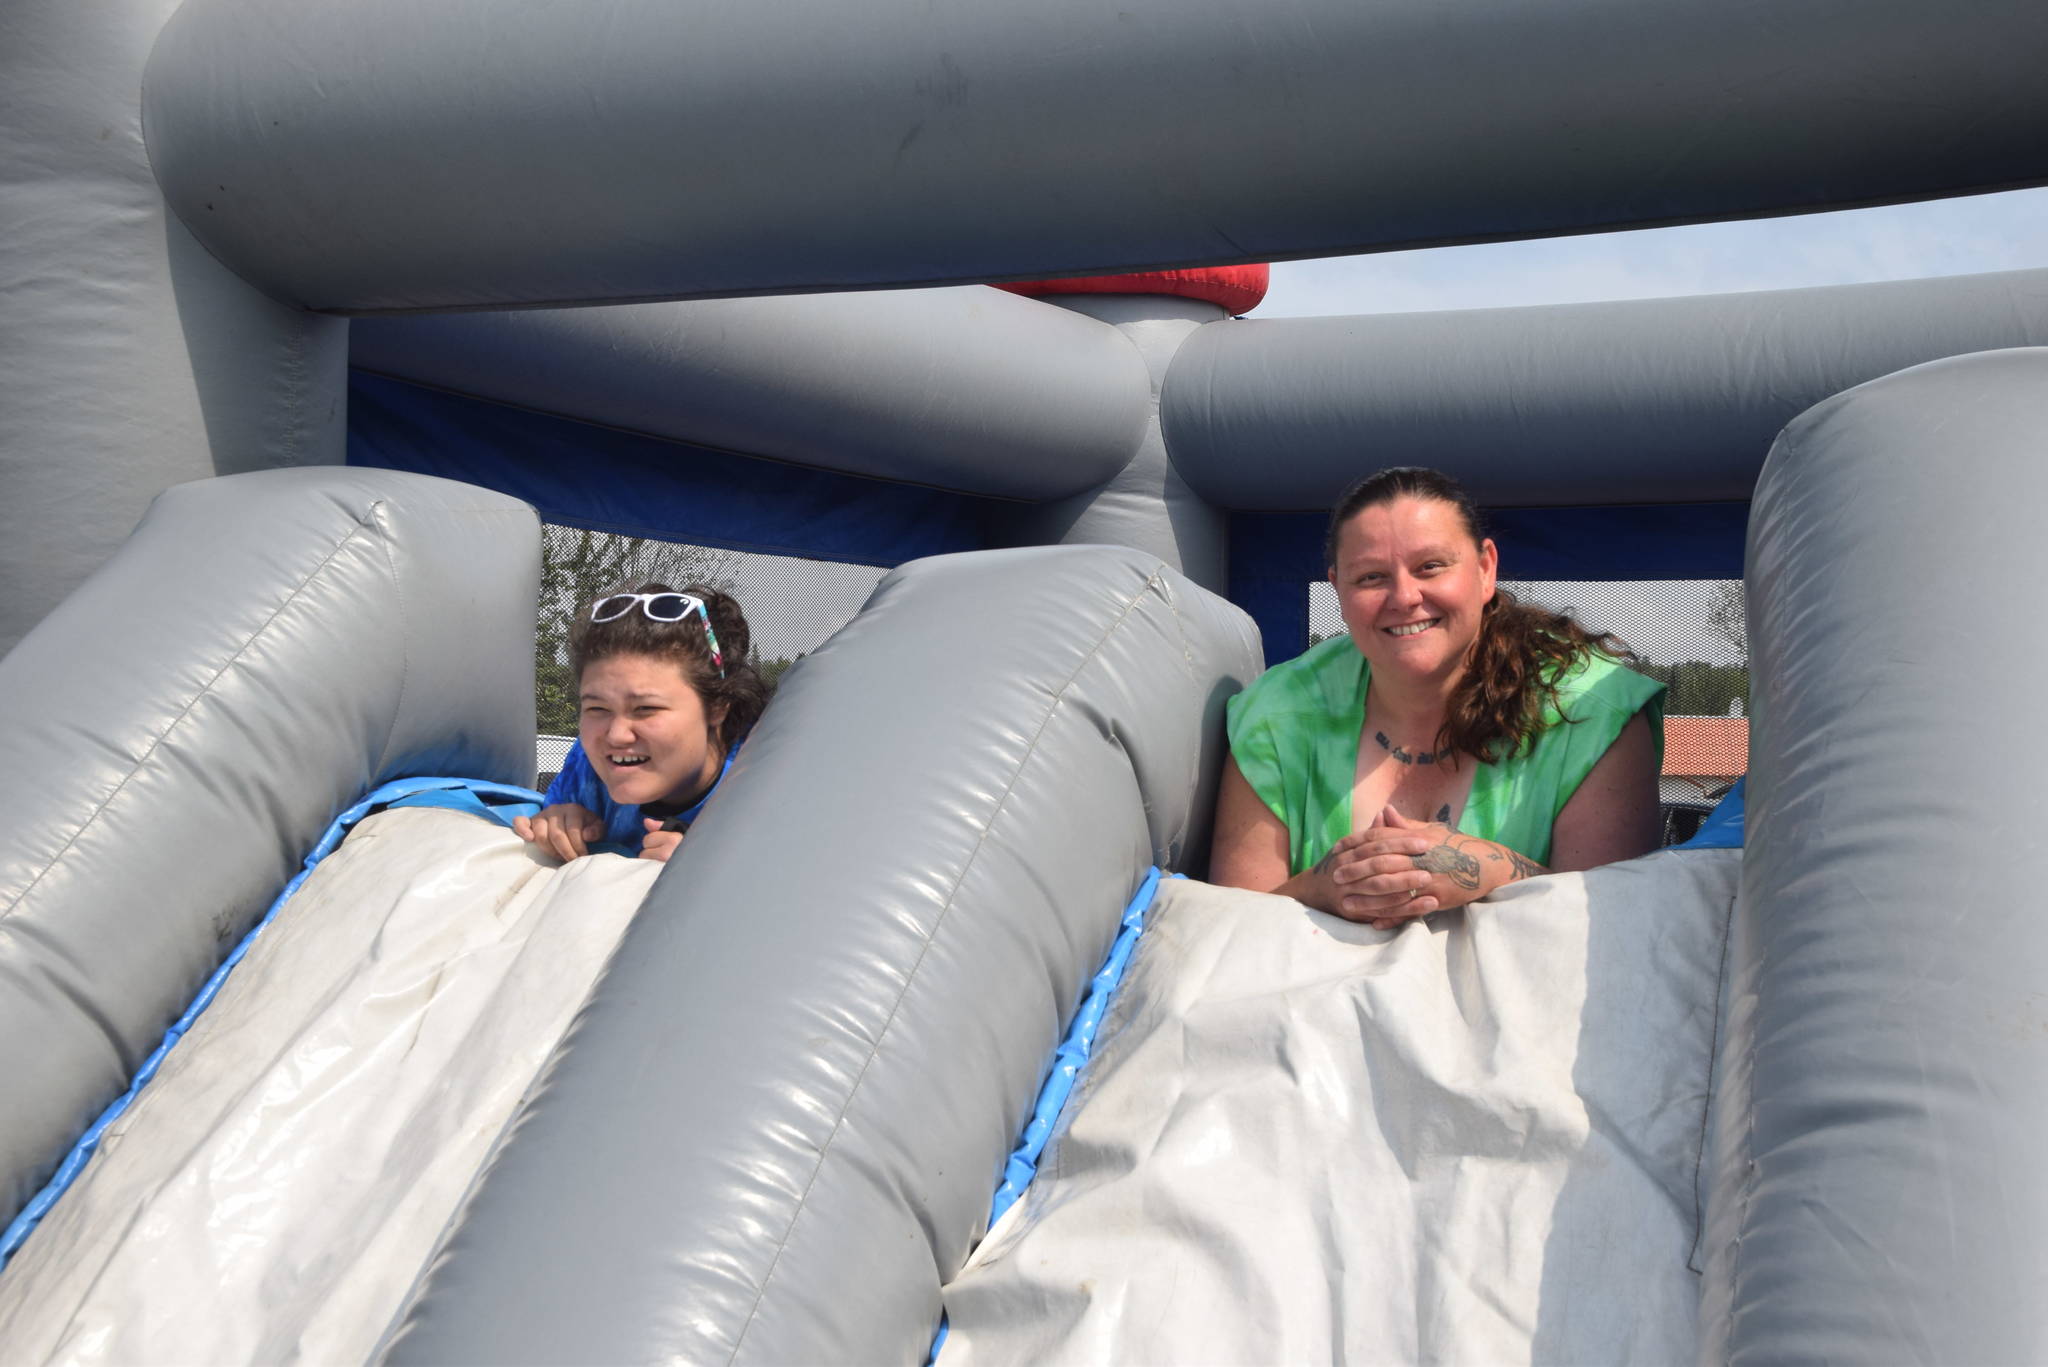 Jordan Tackett, left, and Nikki Marcano, right take a break from the bounce house to pose for a photo during the 2019 Disability Pride Celebration in Soldotna Creek Park on July 20, 2019. (Photo by Brian Mazurek/Peninsula Clarion)